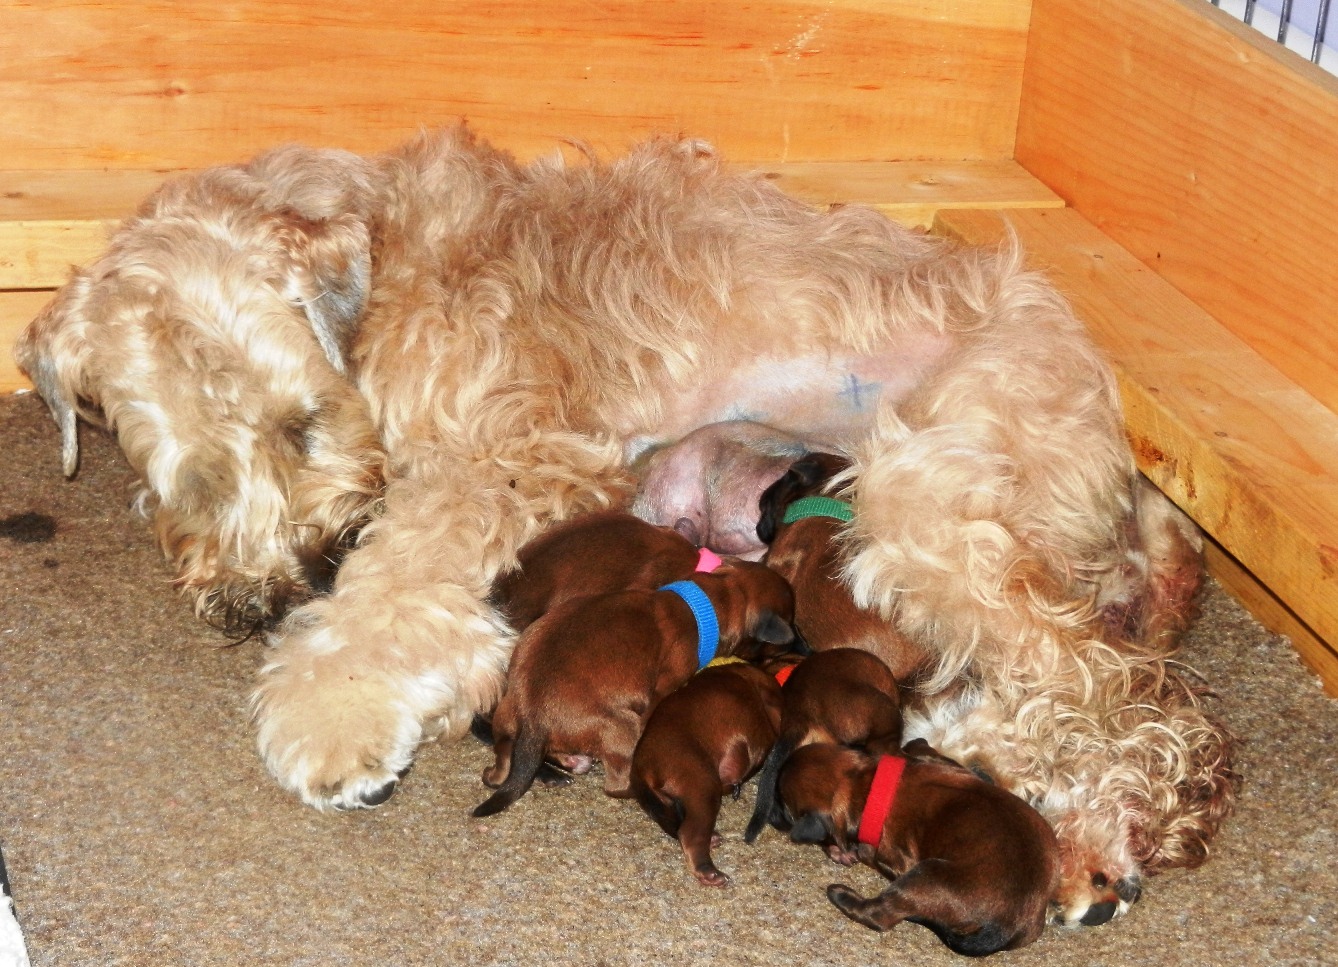 Pinch & puppies...Day One